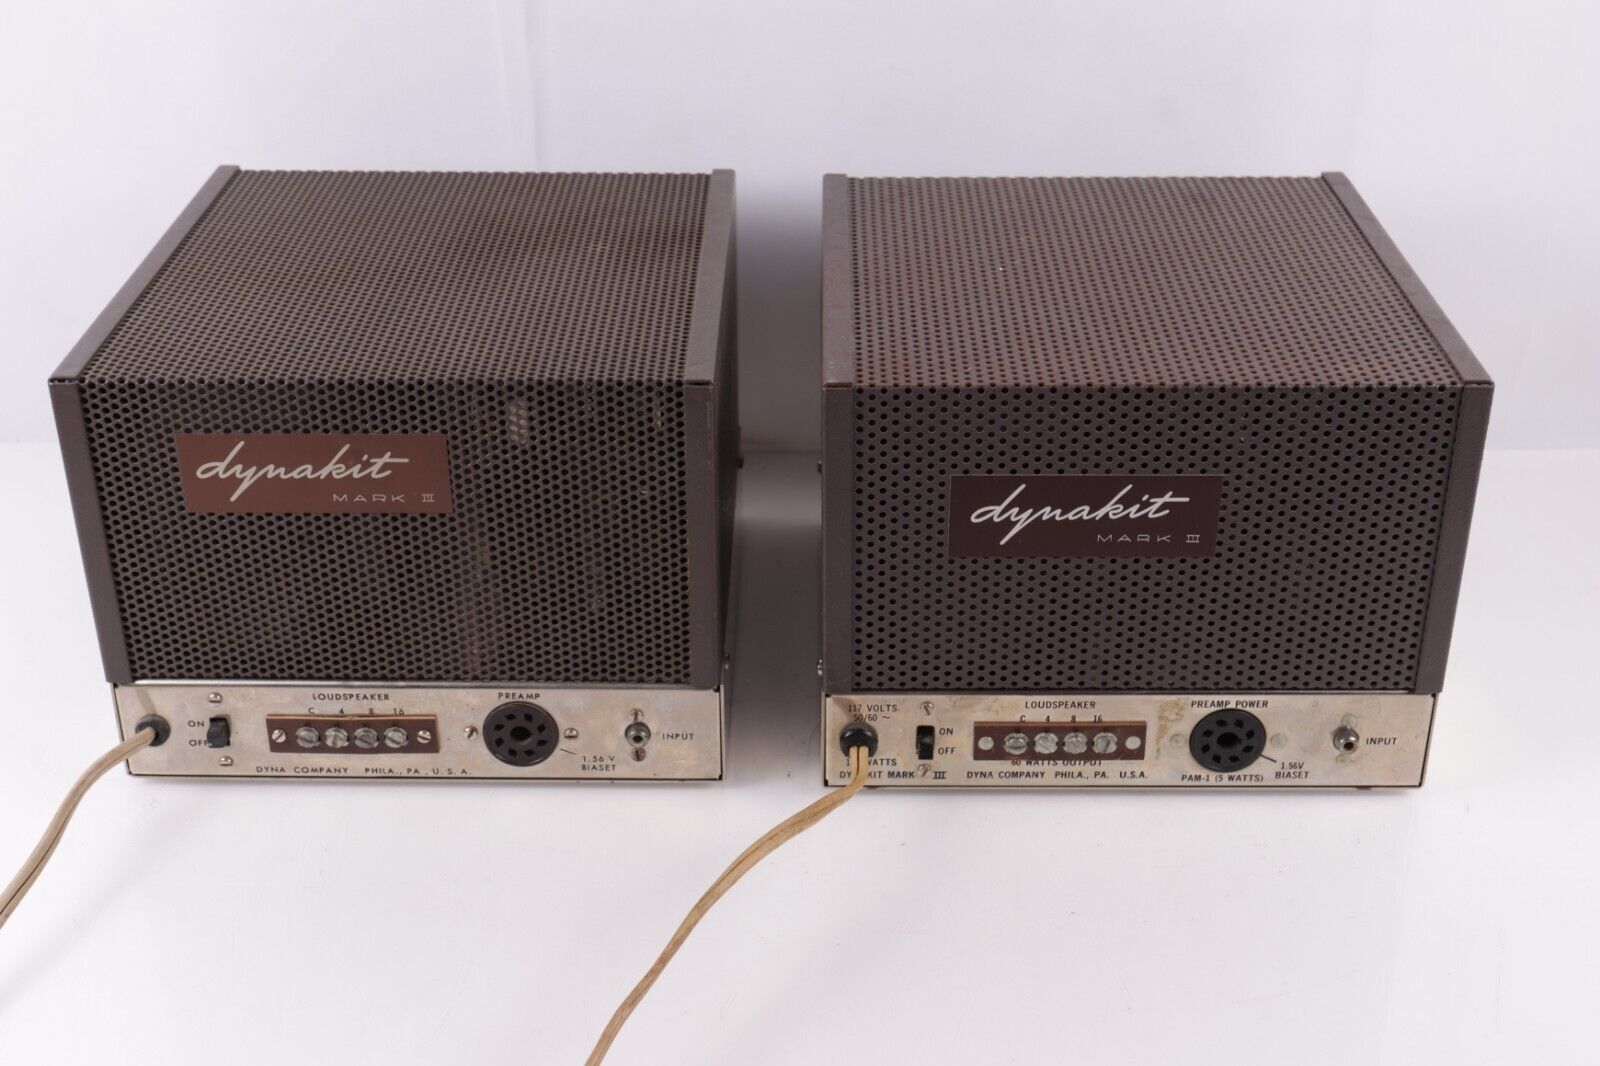 Pair of Dynaco Mark III Tube Amplifiers==Matched Quad KT-88\'s